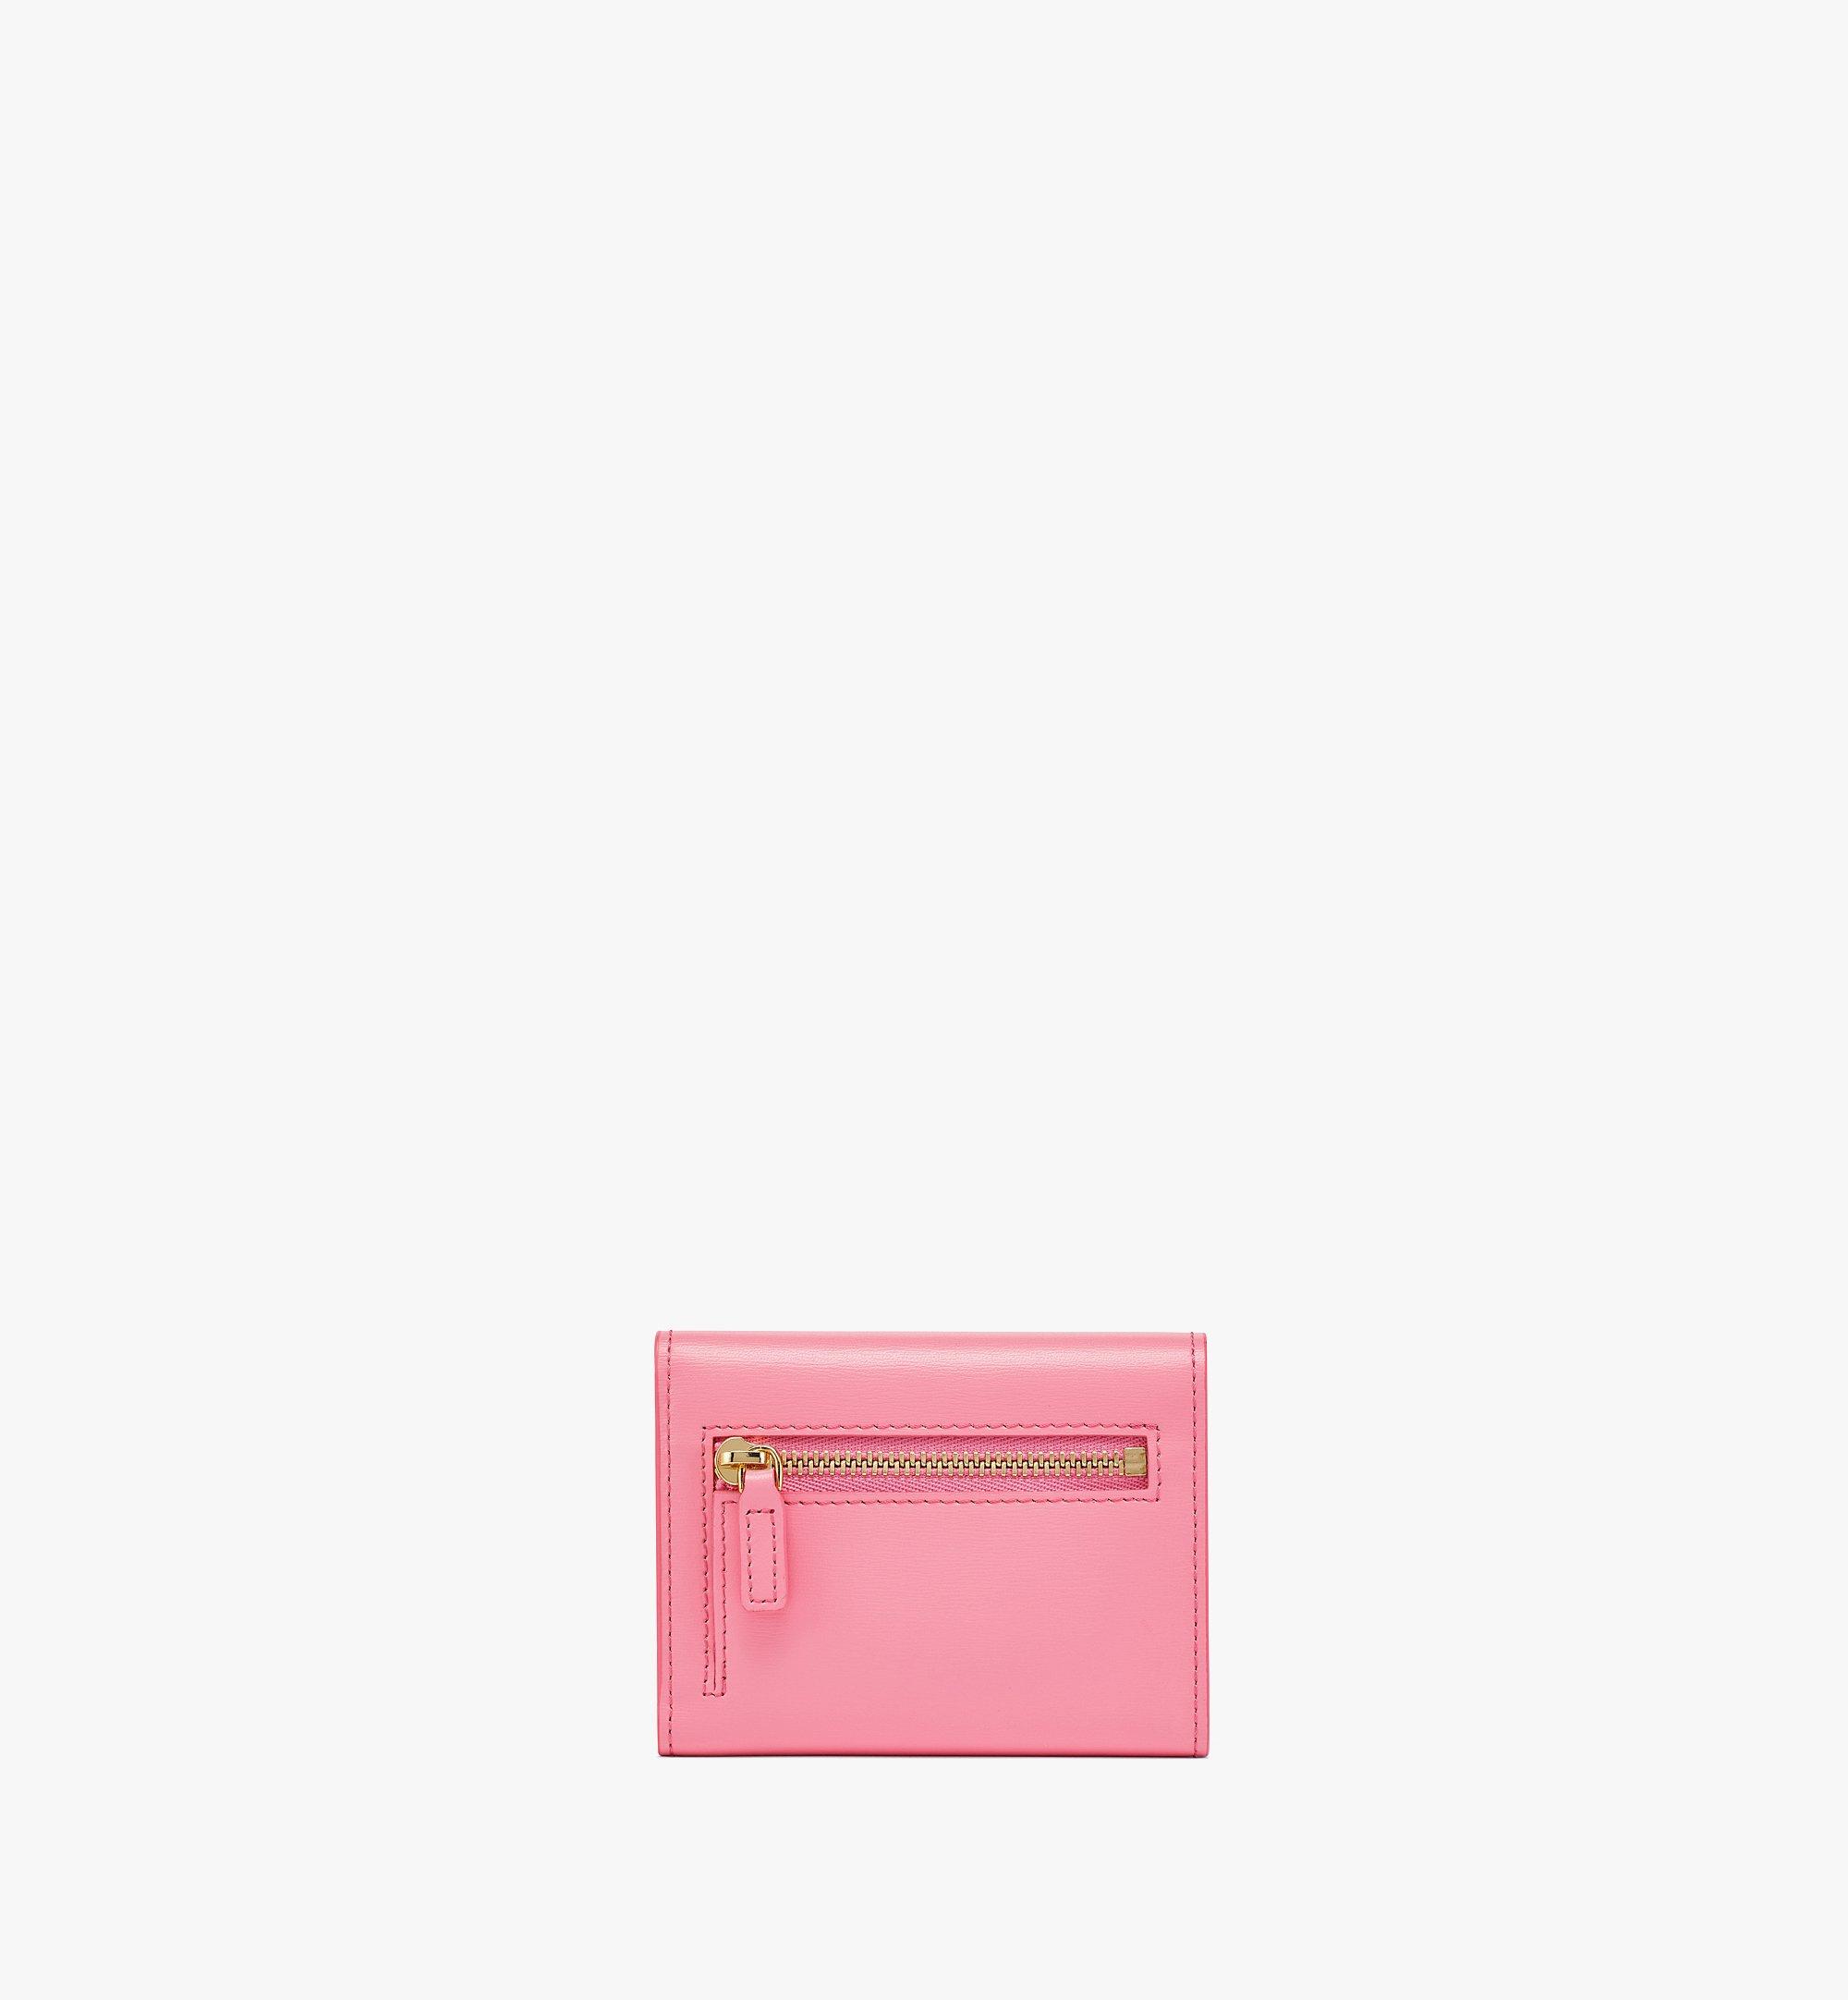 MCM Tracy Trifold Wallet in Spanish Leather Pink MYSBAPA01QV001 Alternate View 2